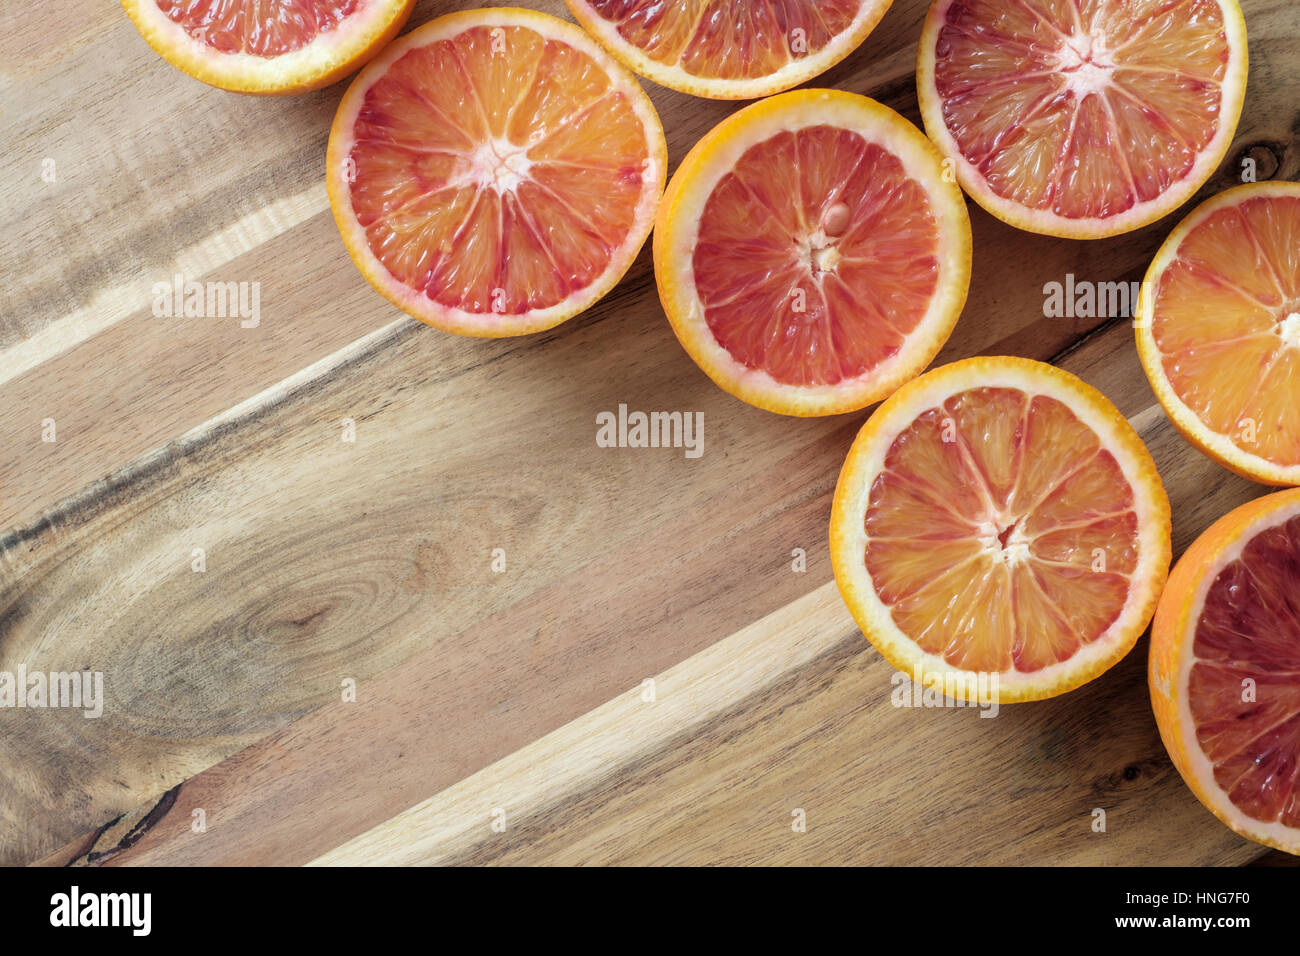 Fresh half cut oranges on wooden table - Copy space Stock Photo